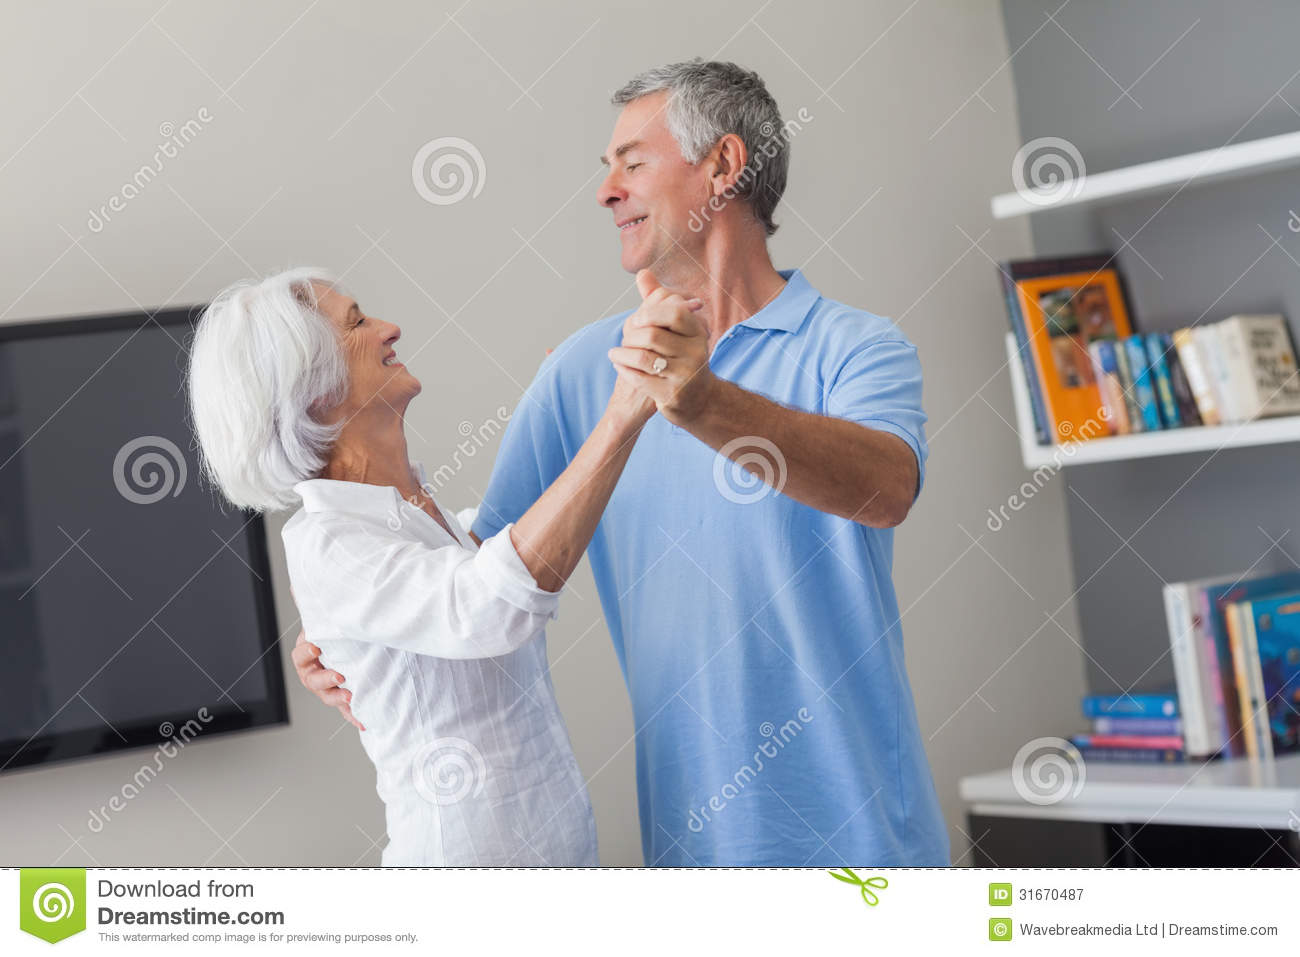 Free Stock Photography  Elderly Couple Dancing In The Living Room